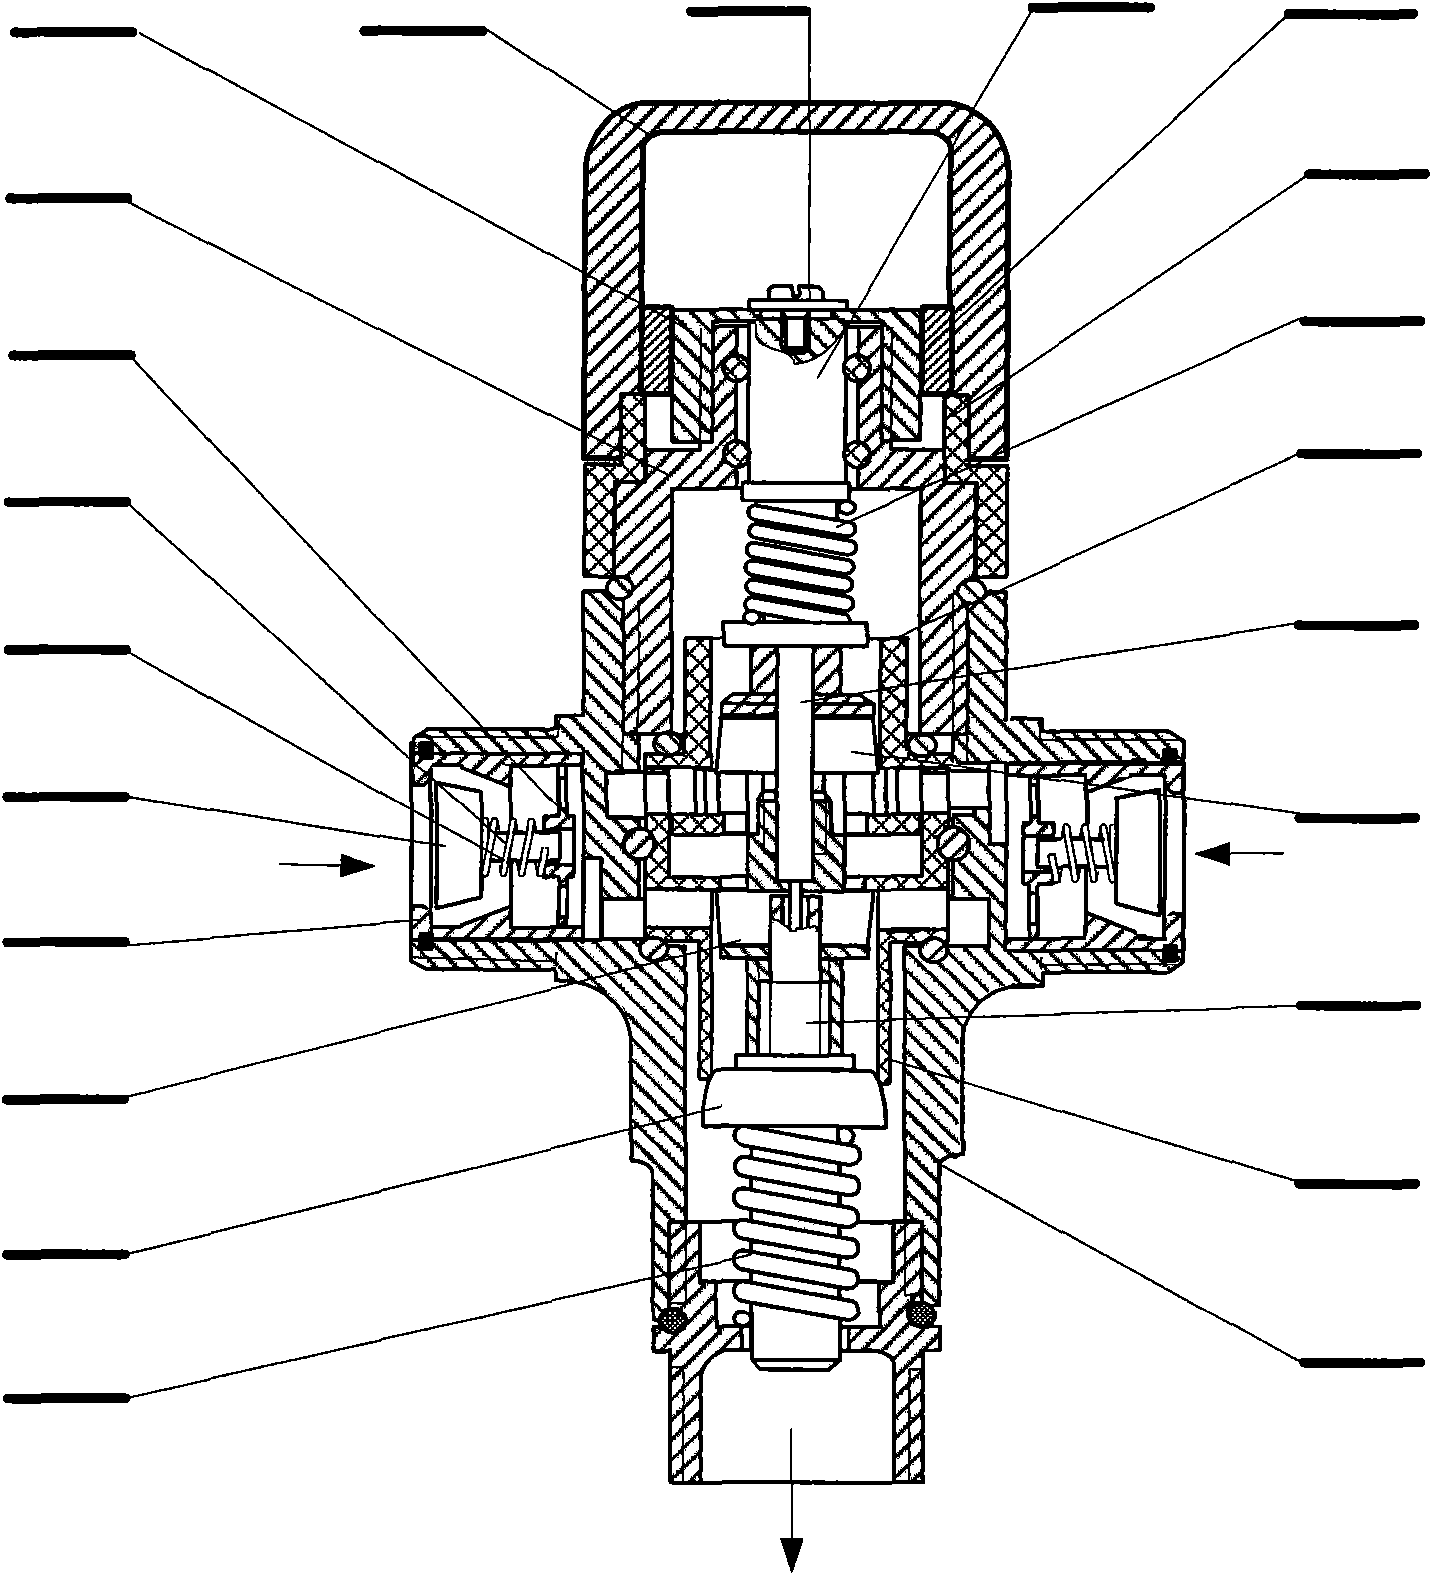 Mixed water valve for automatically limiting flow